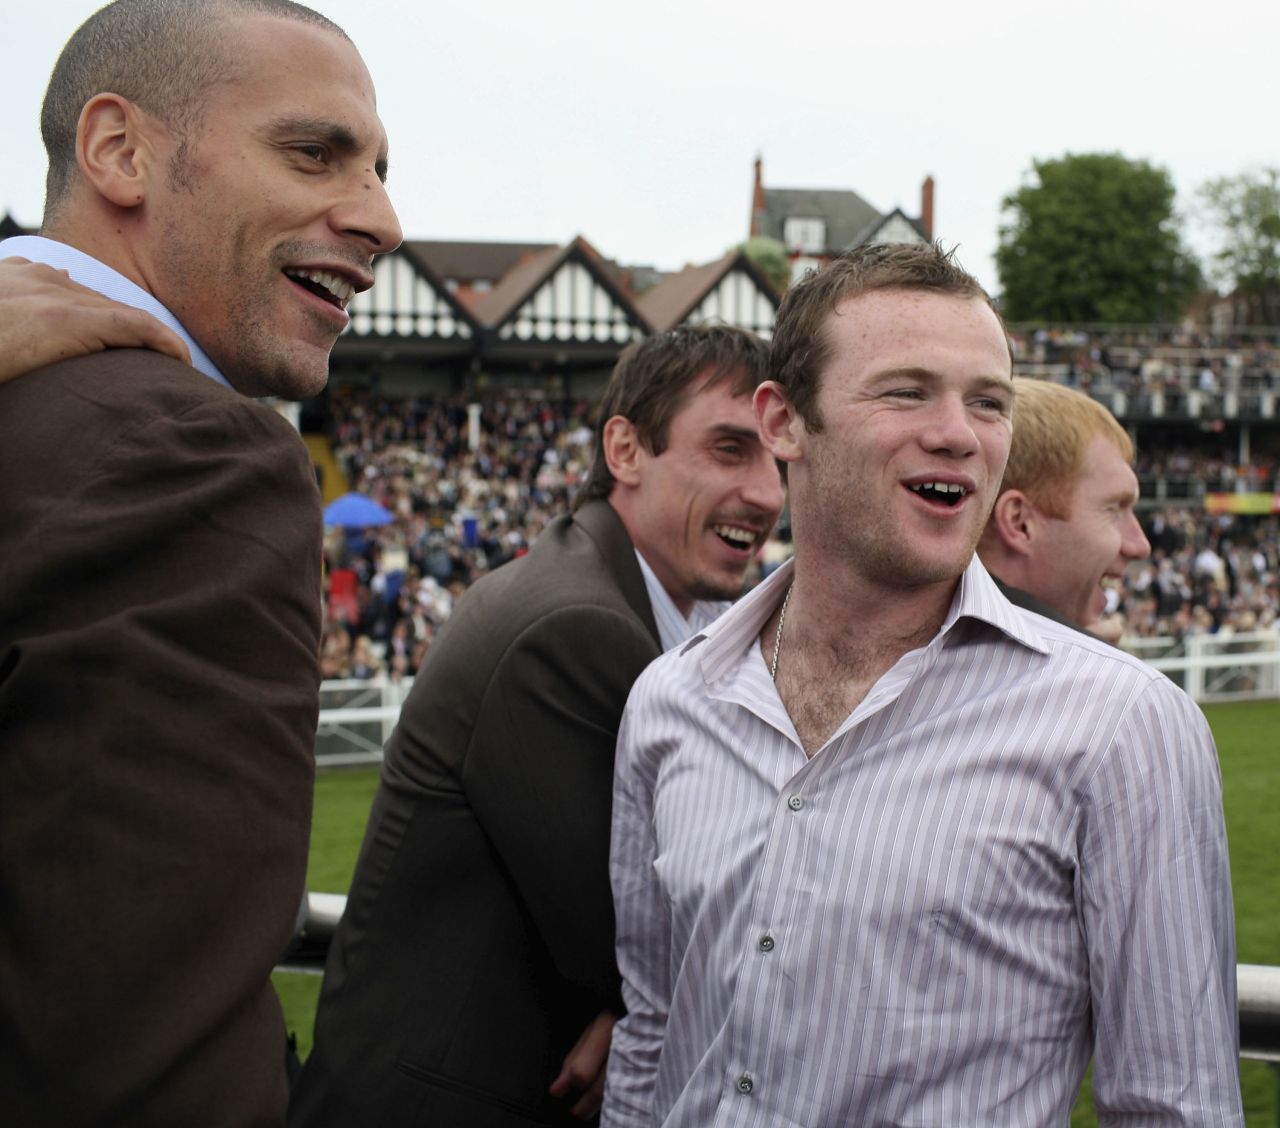 Manchester United striker Wayne Rooney initially bought three horses -- Pippy, Tomway and Switcharooney -- but  it was Yourartisonfire who provided his first win at English course Haydock Park on July 5.